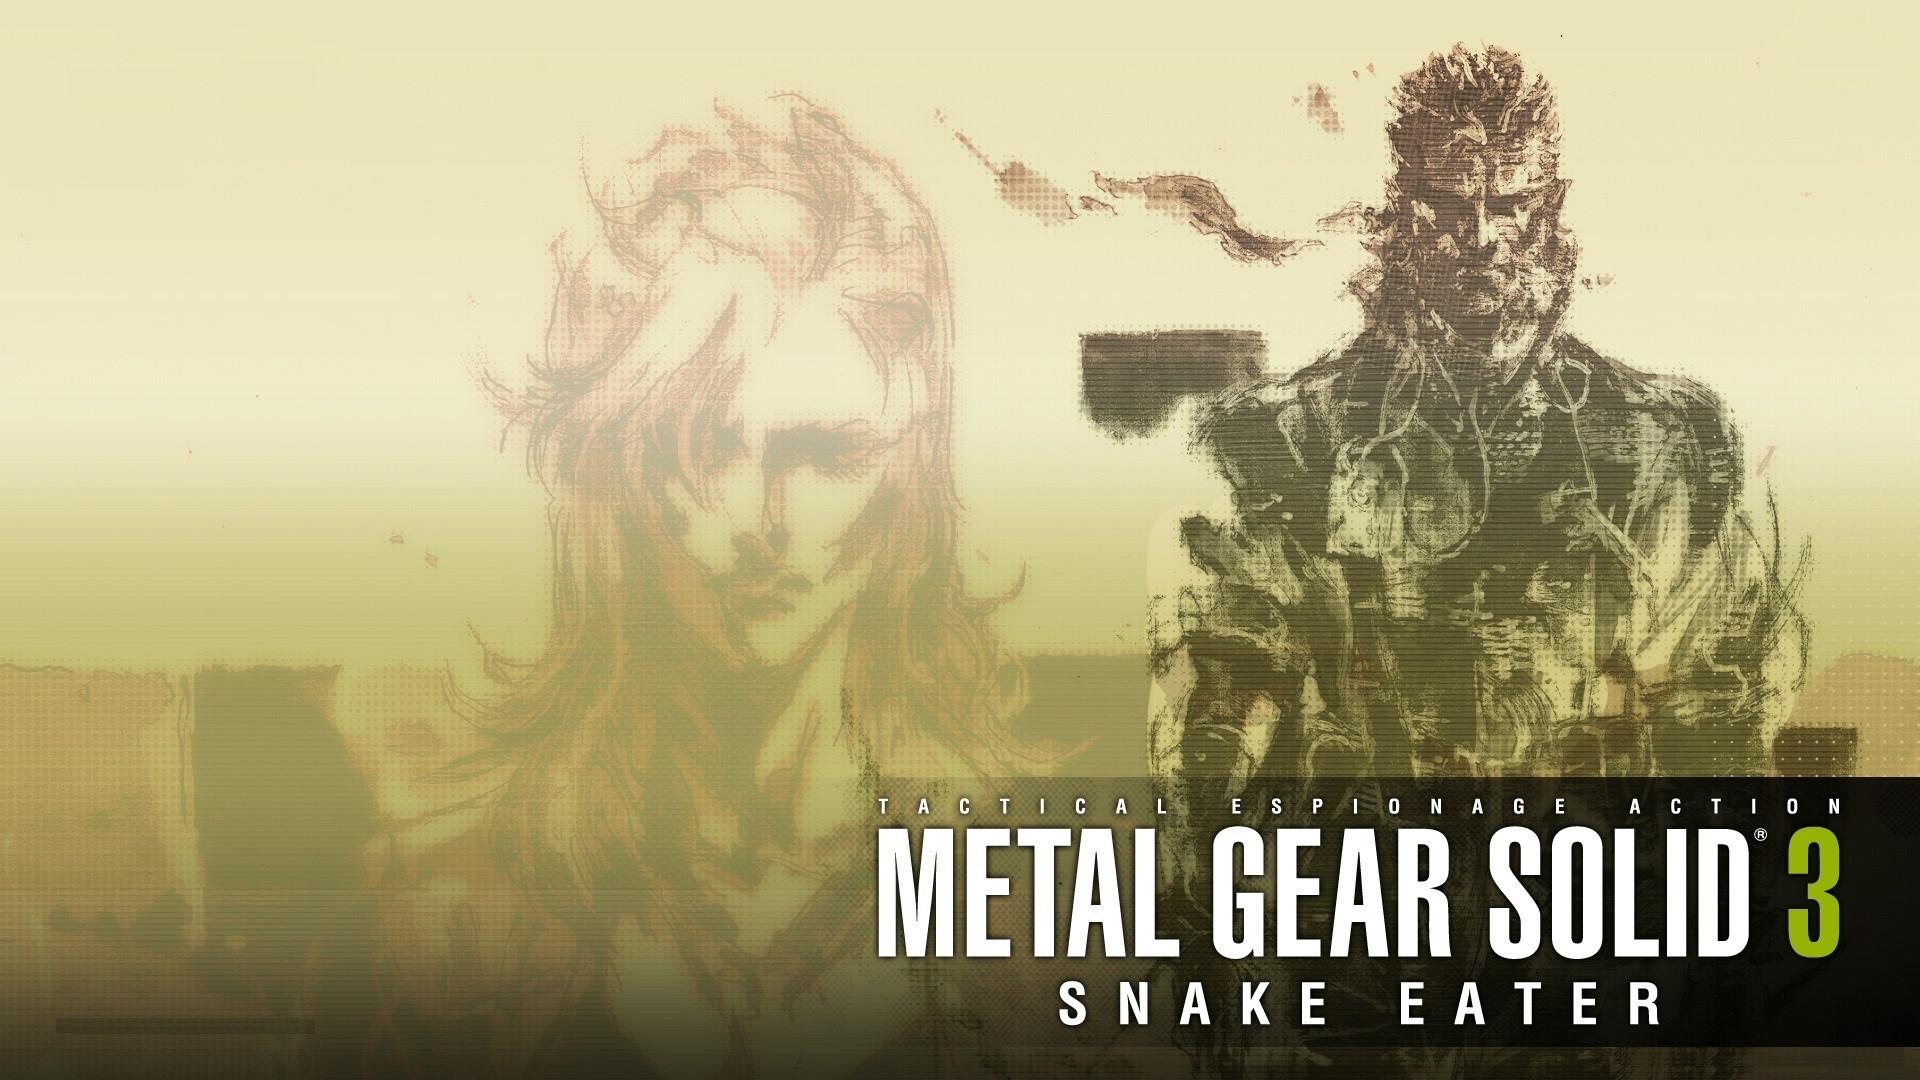 Metal Gear Solid 3: Snake Eater [1920x1080]